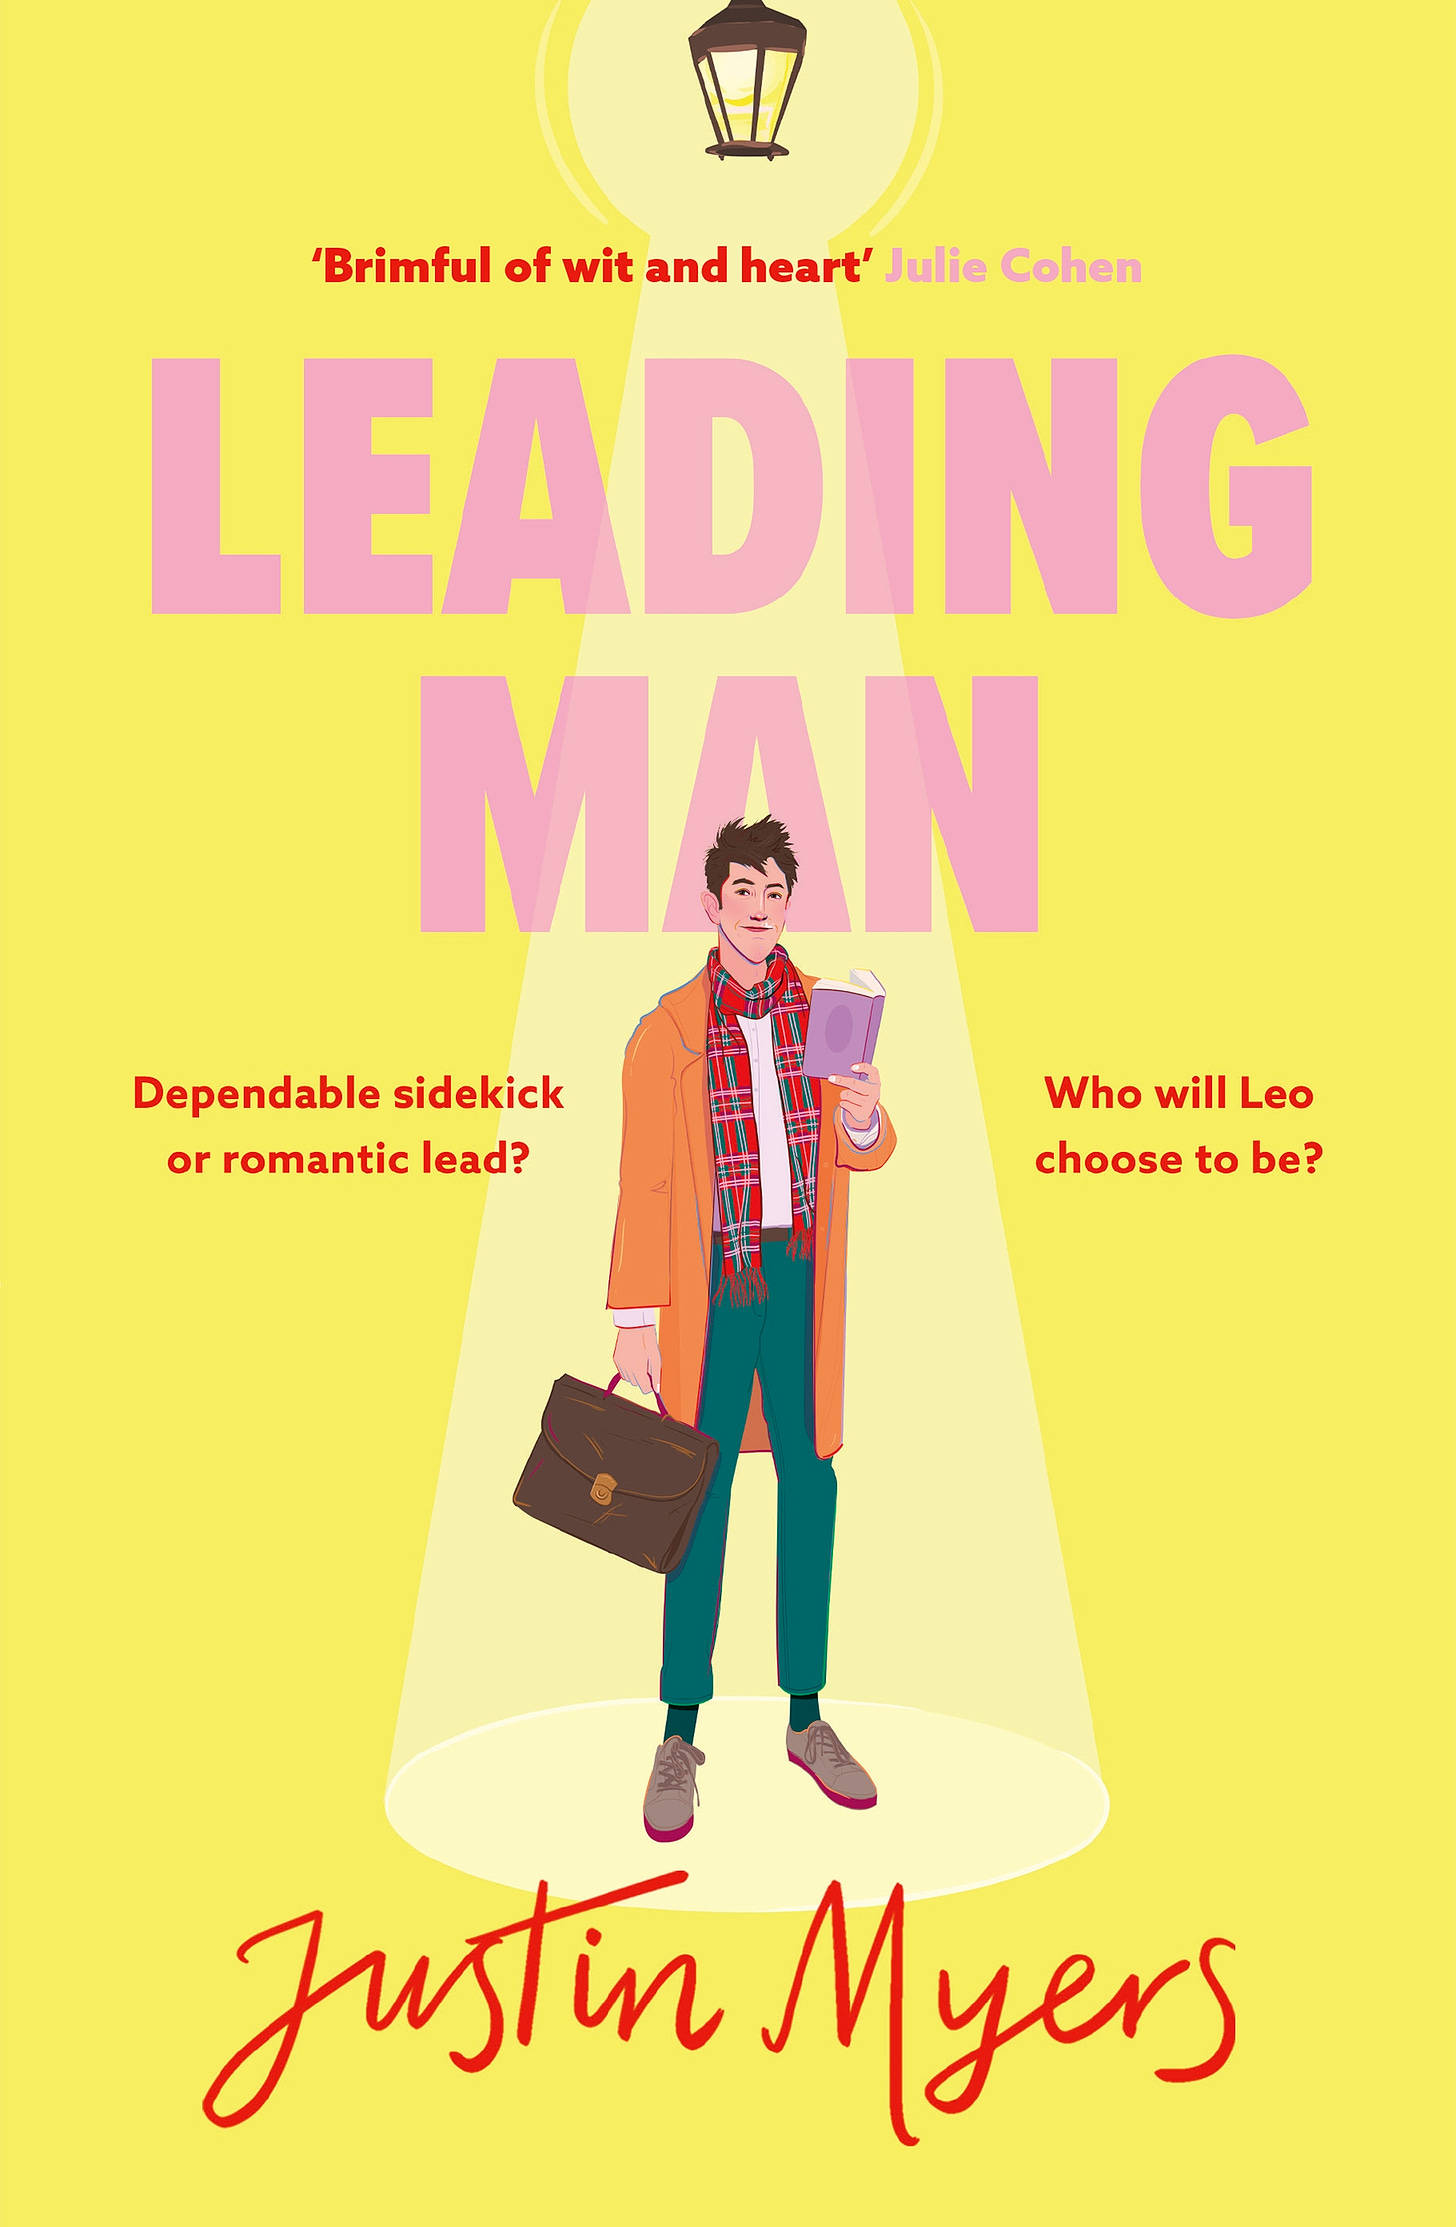 The cover of my novel LEADING MAN, which features the main character in a Mac and tartan scarf, carrying a briefcase and holding a book